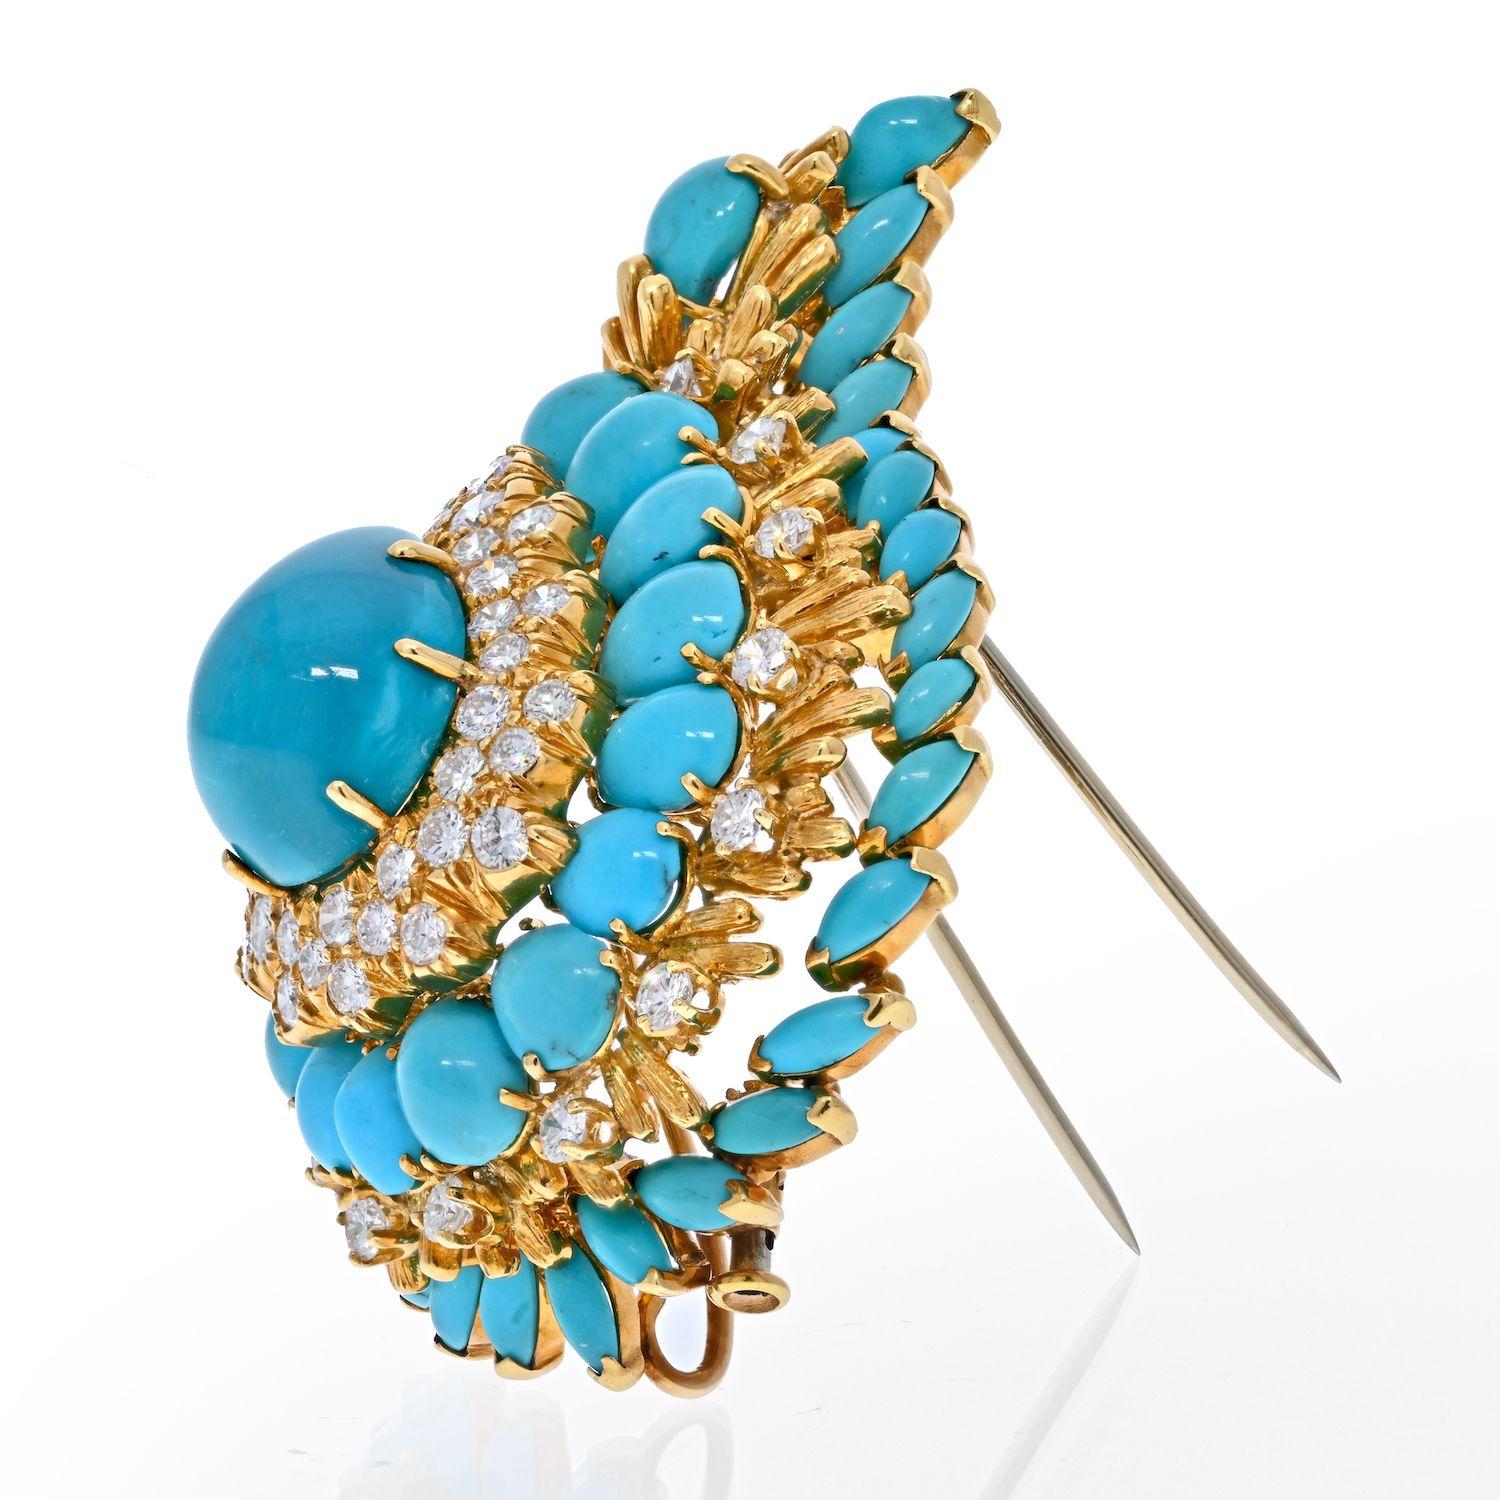 This is a stunning turquoise brooch with diamonds and turquoises. Absolutely stunning colors, and quality, only by David Webb. Smooth turquoises all throughout, color consistent on all, natural and beautiful. 
Wear it on a scarf, lapel, sweater or